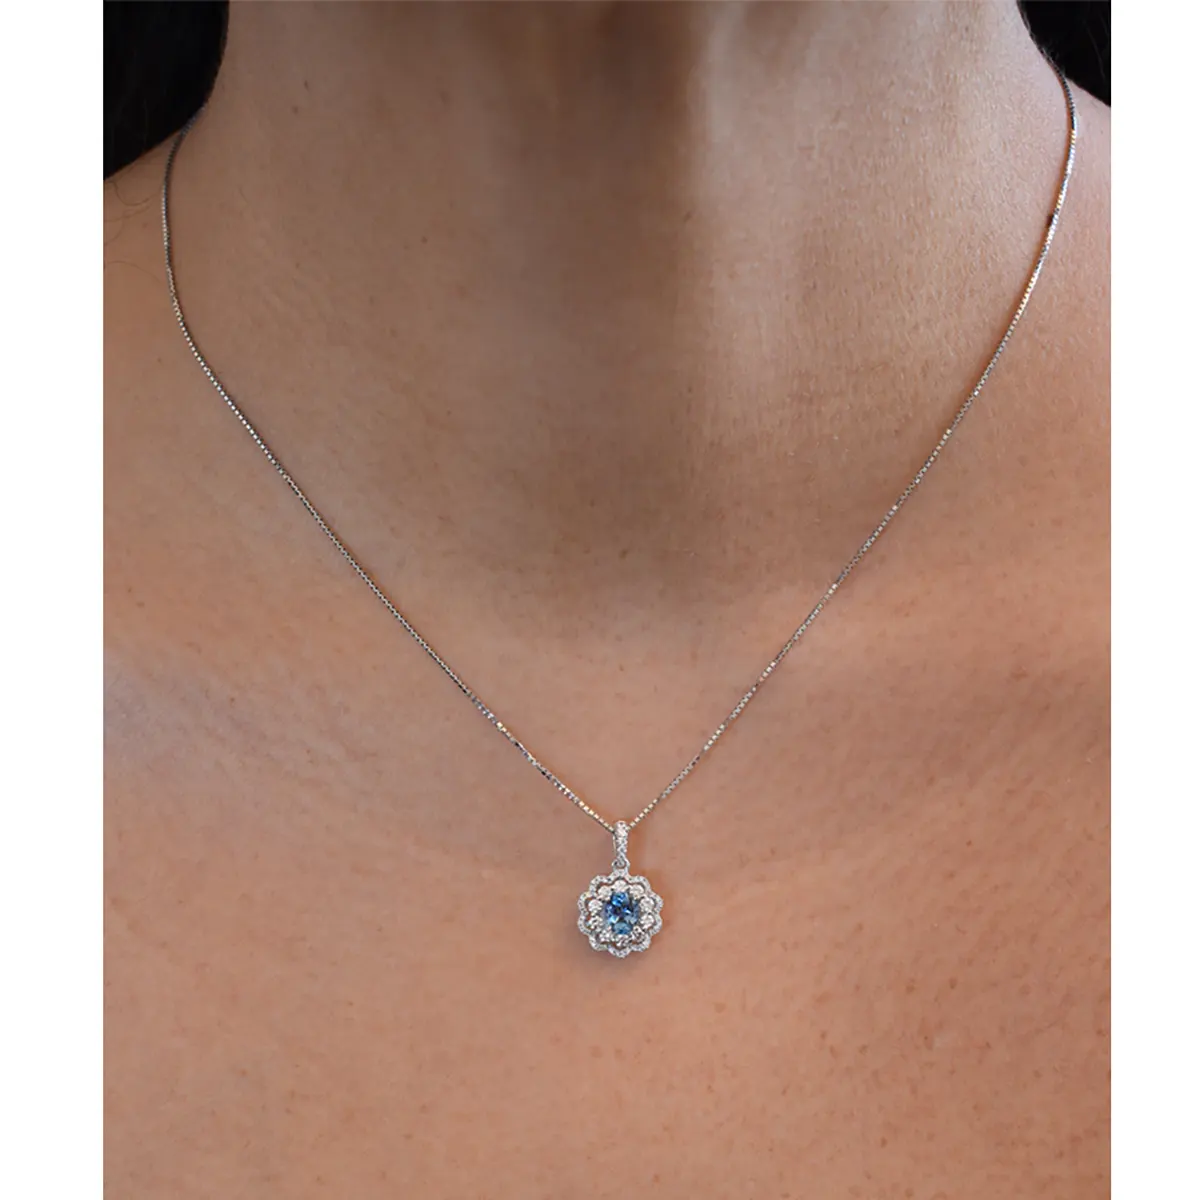 Necklace on a model's neck showing the excellent quality of the oval shape aquamarine and brilliant diamonds